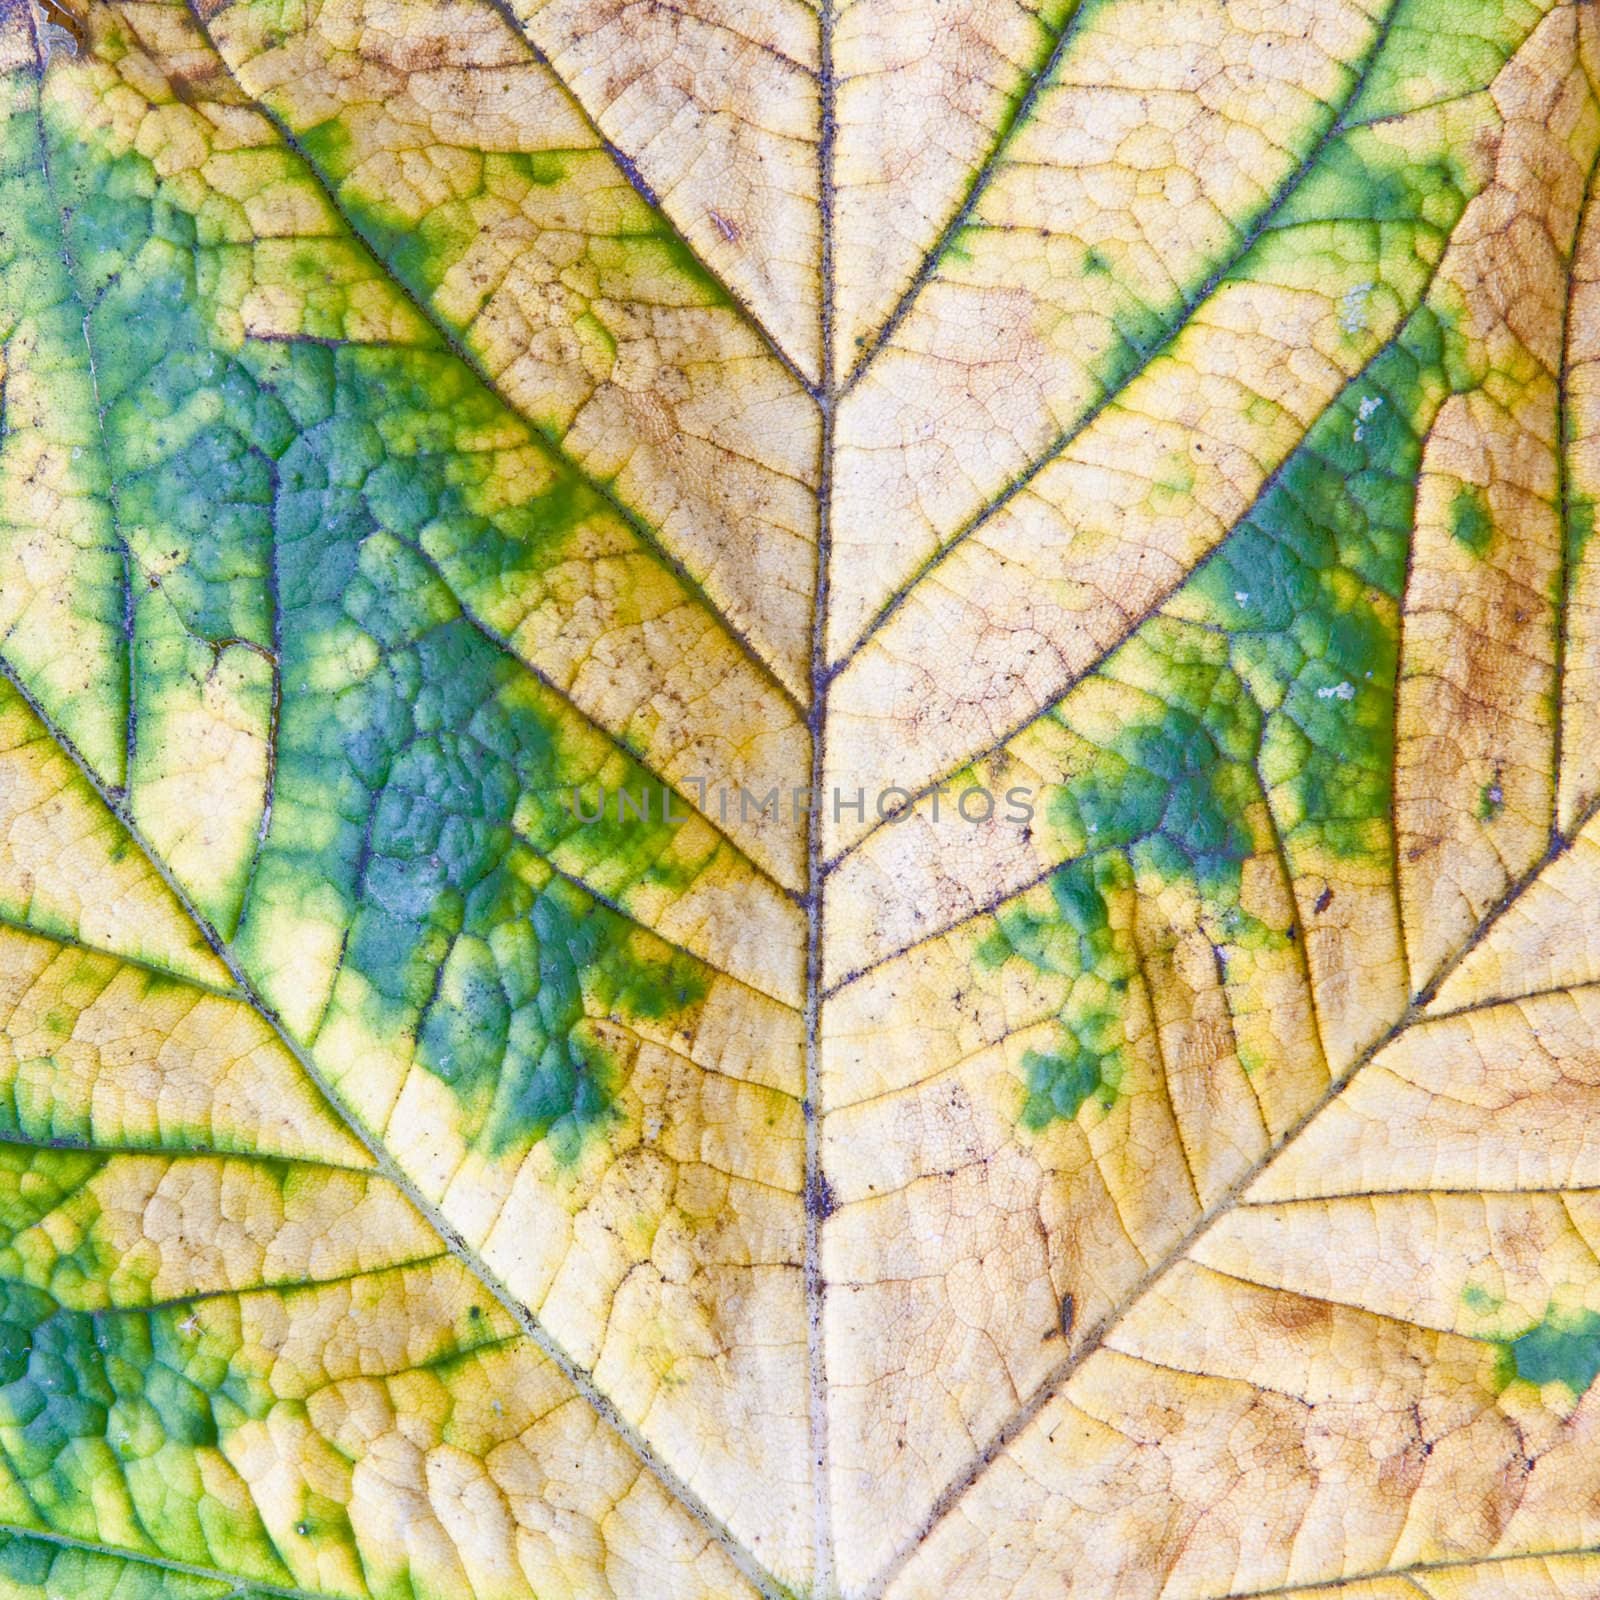 Macro shot of a maple leaf turning brown in autumn